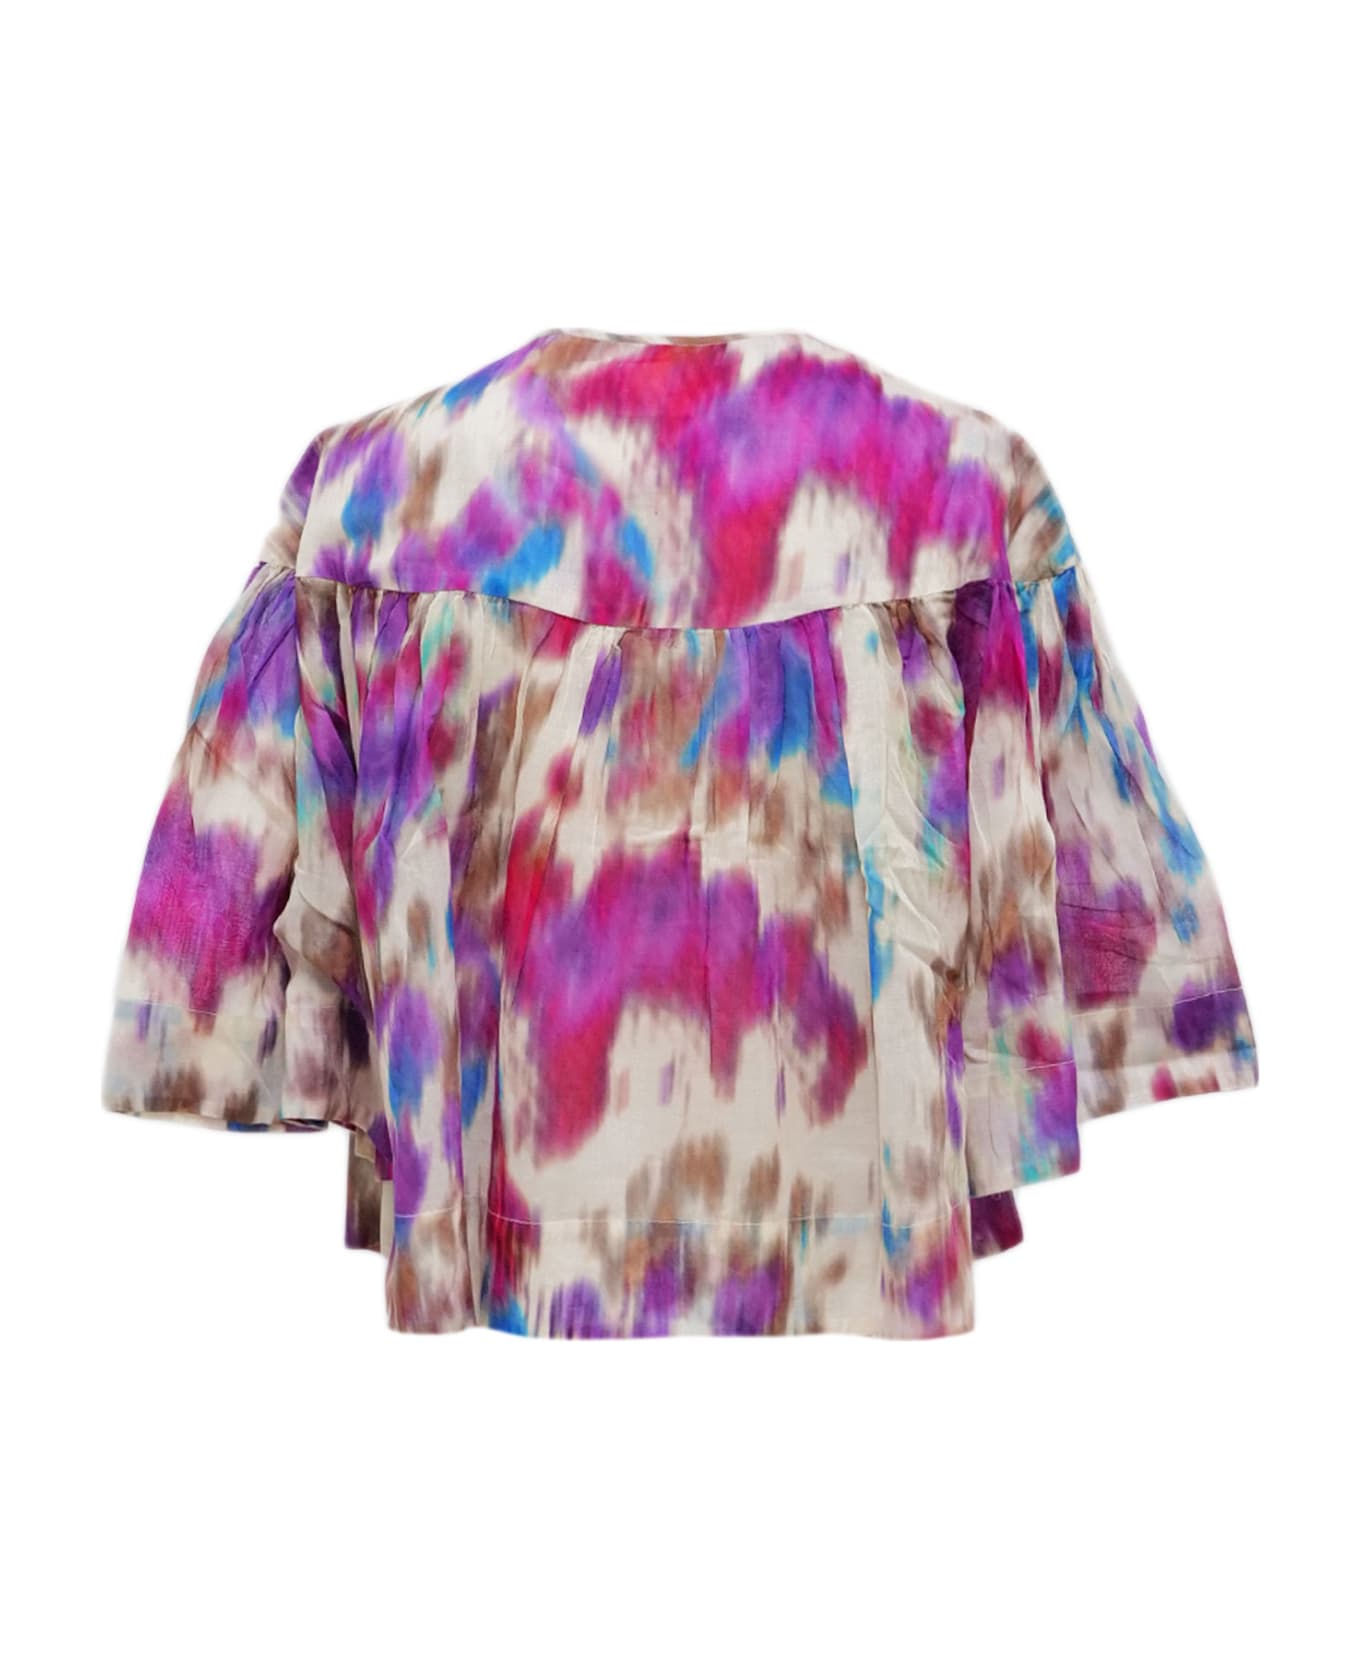 Marant Étoile Cotton Top With Long Sleeves - Multicolor